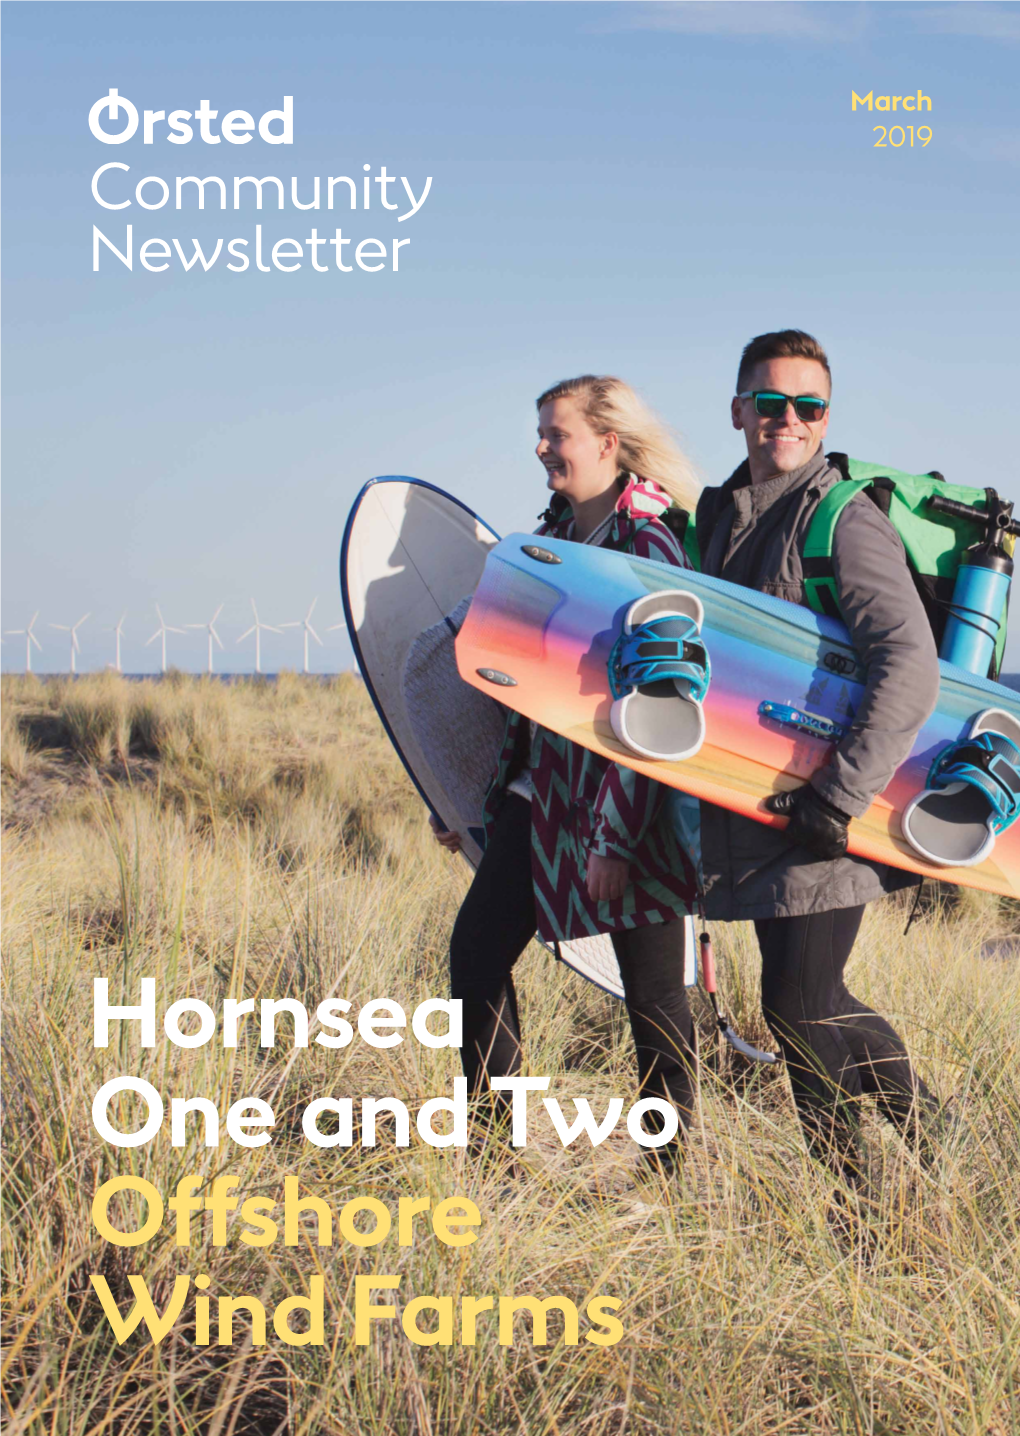 Hornsea One and Two Offshore Wind Farms About Ørsted | the Area | Hornsea One | Hornsea Two | Community | Contact Us